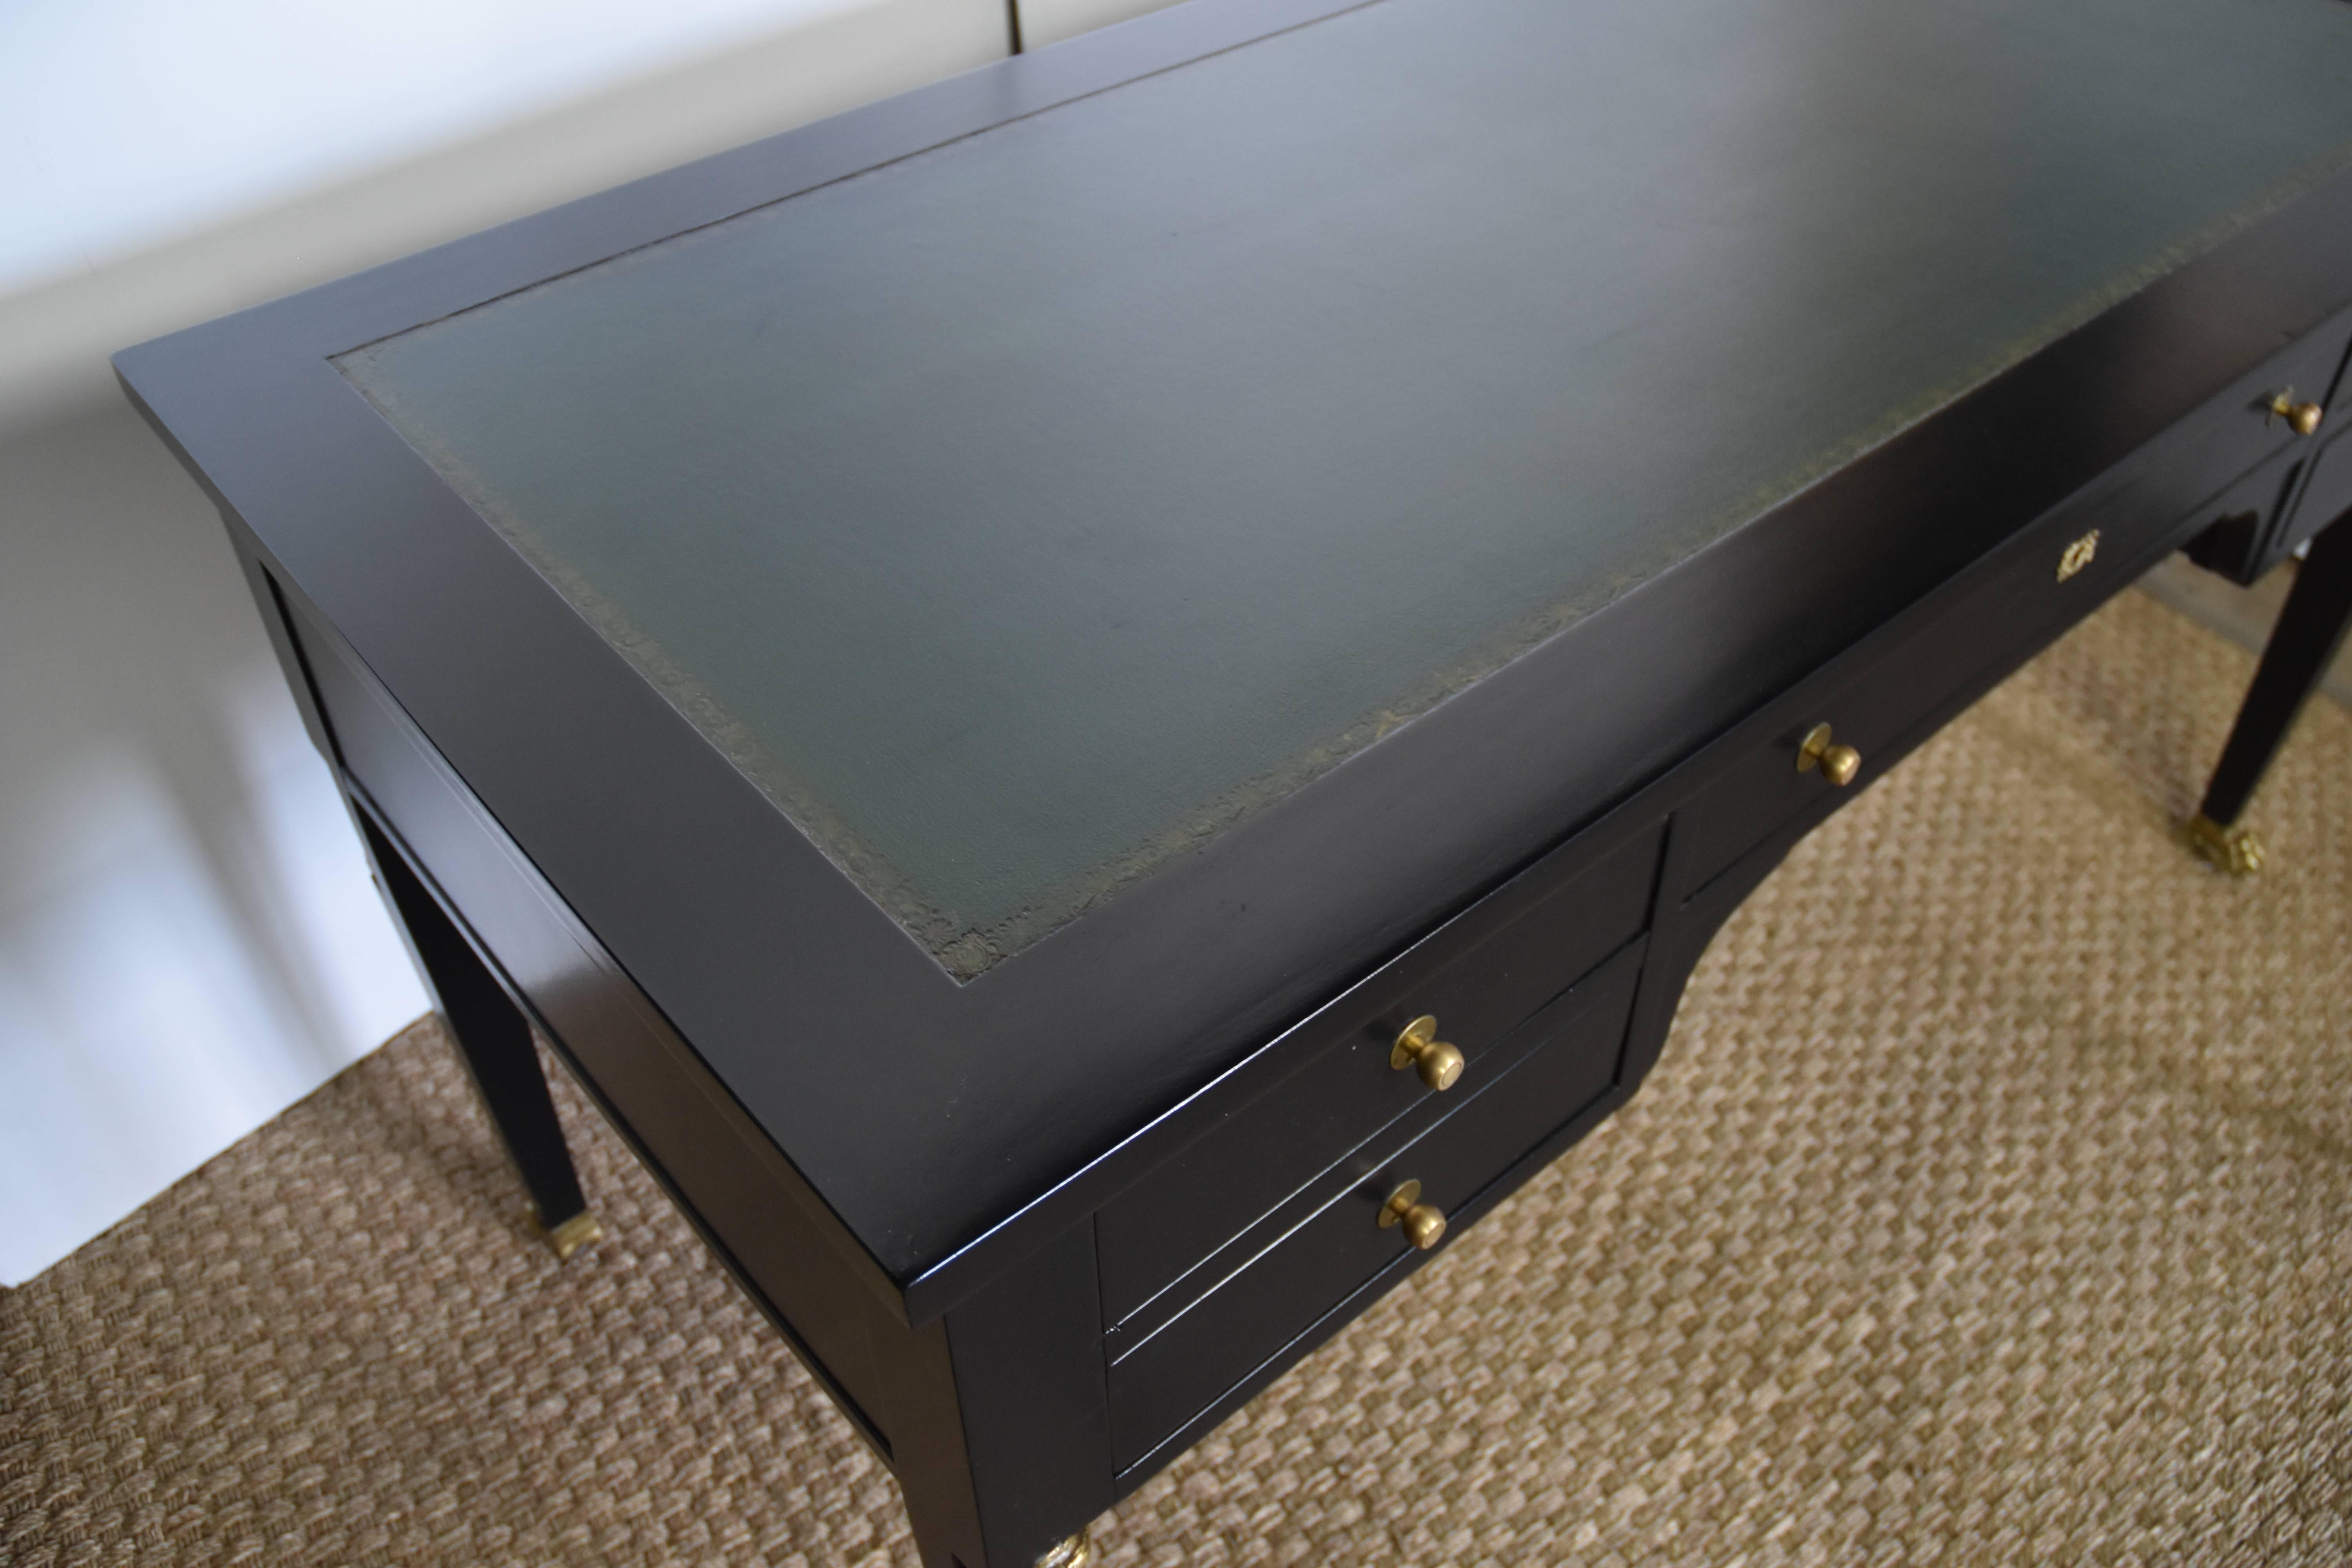 Lovely Empire style bureau plat with green top and painted black finish. The front of the desk features a pair of bronze busts and later added brass pulls. Each of the legs has paw feet. There are two pull-out extensions on each end. The desk is